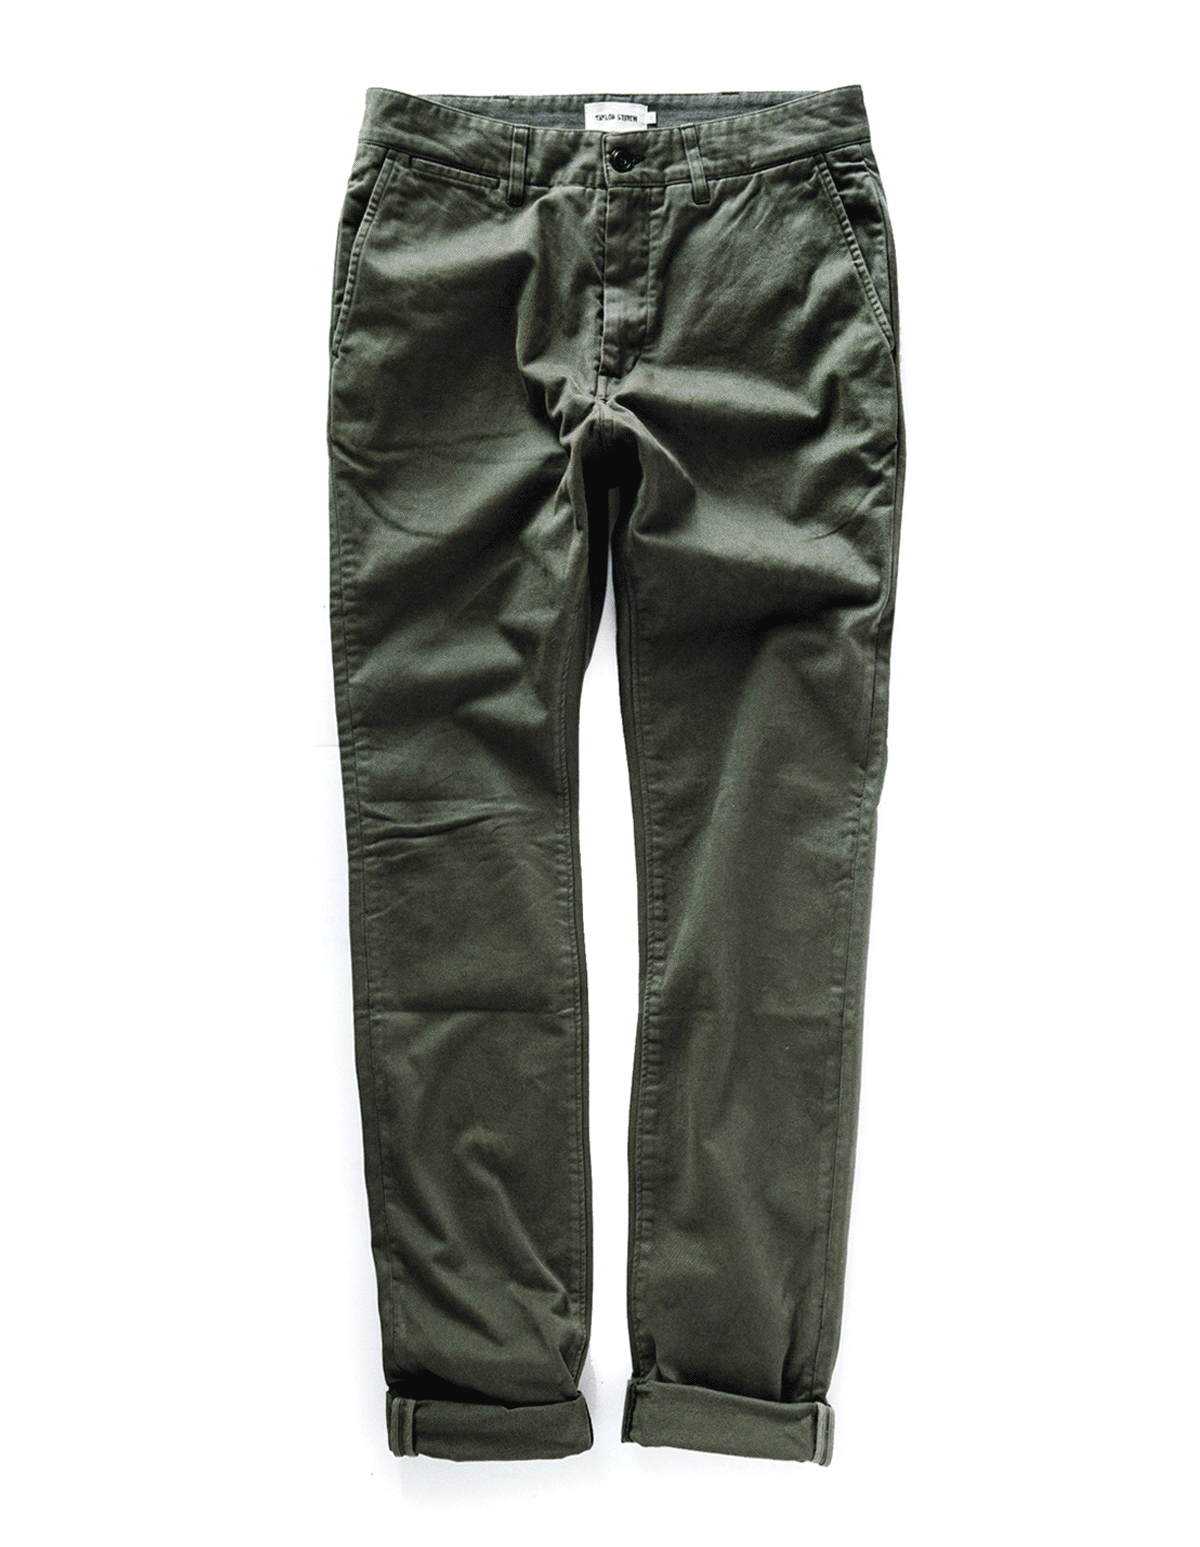 The Foundation Pant in Organic Khaki, Coal, Olive and Espresso